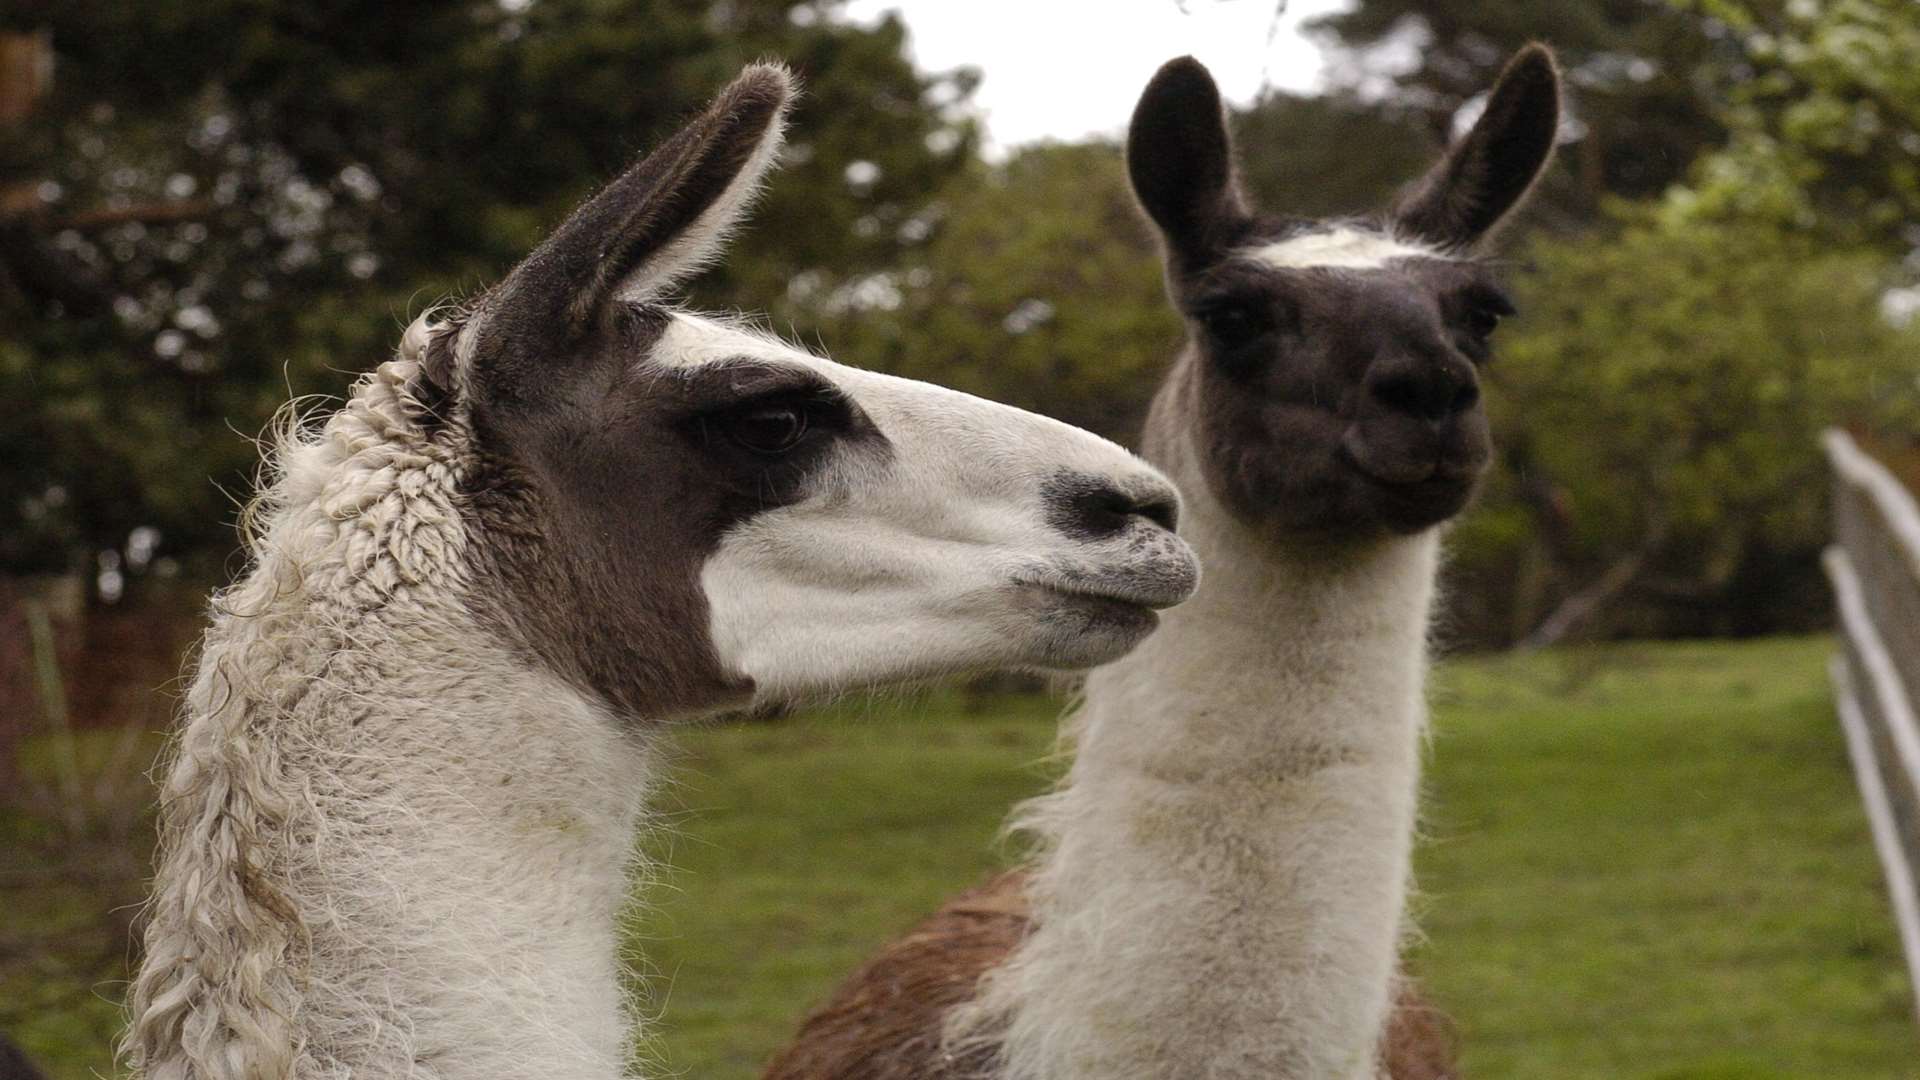 Llamas were spotted on the railway. Stock pic